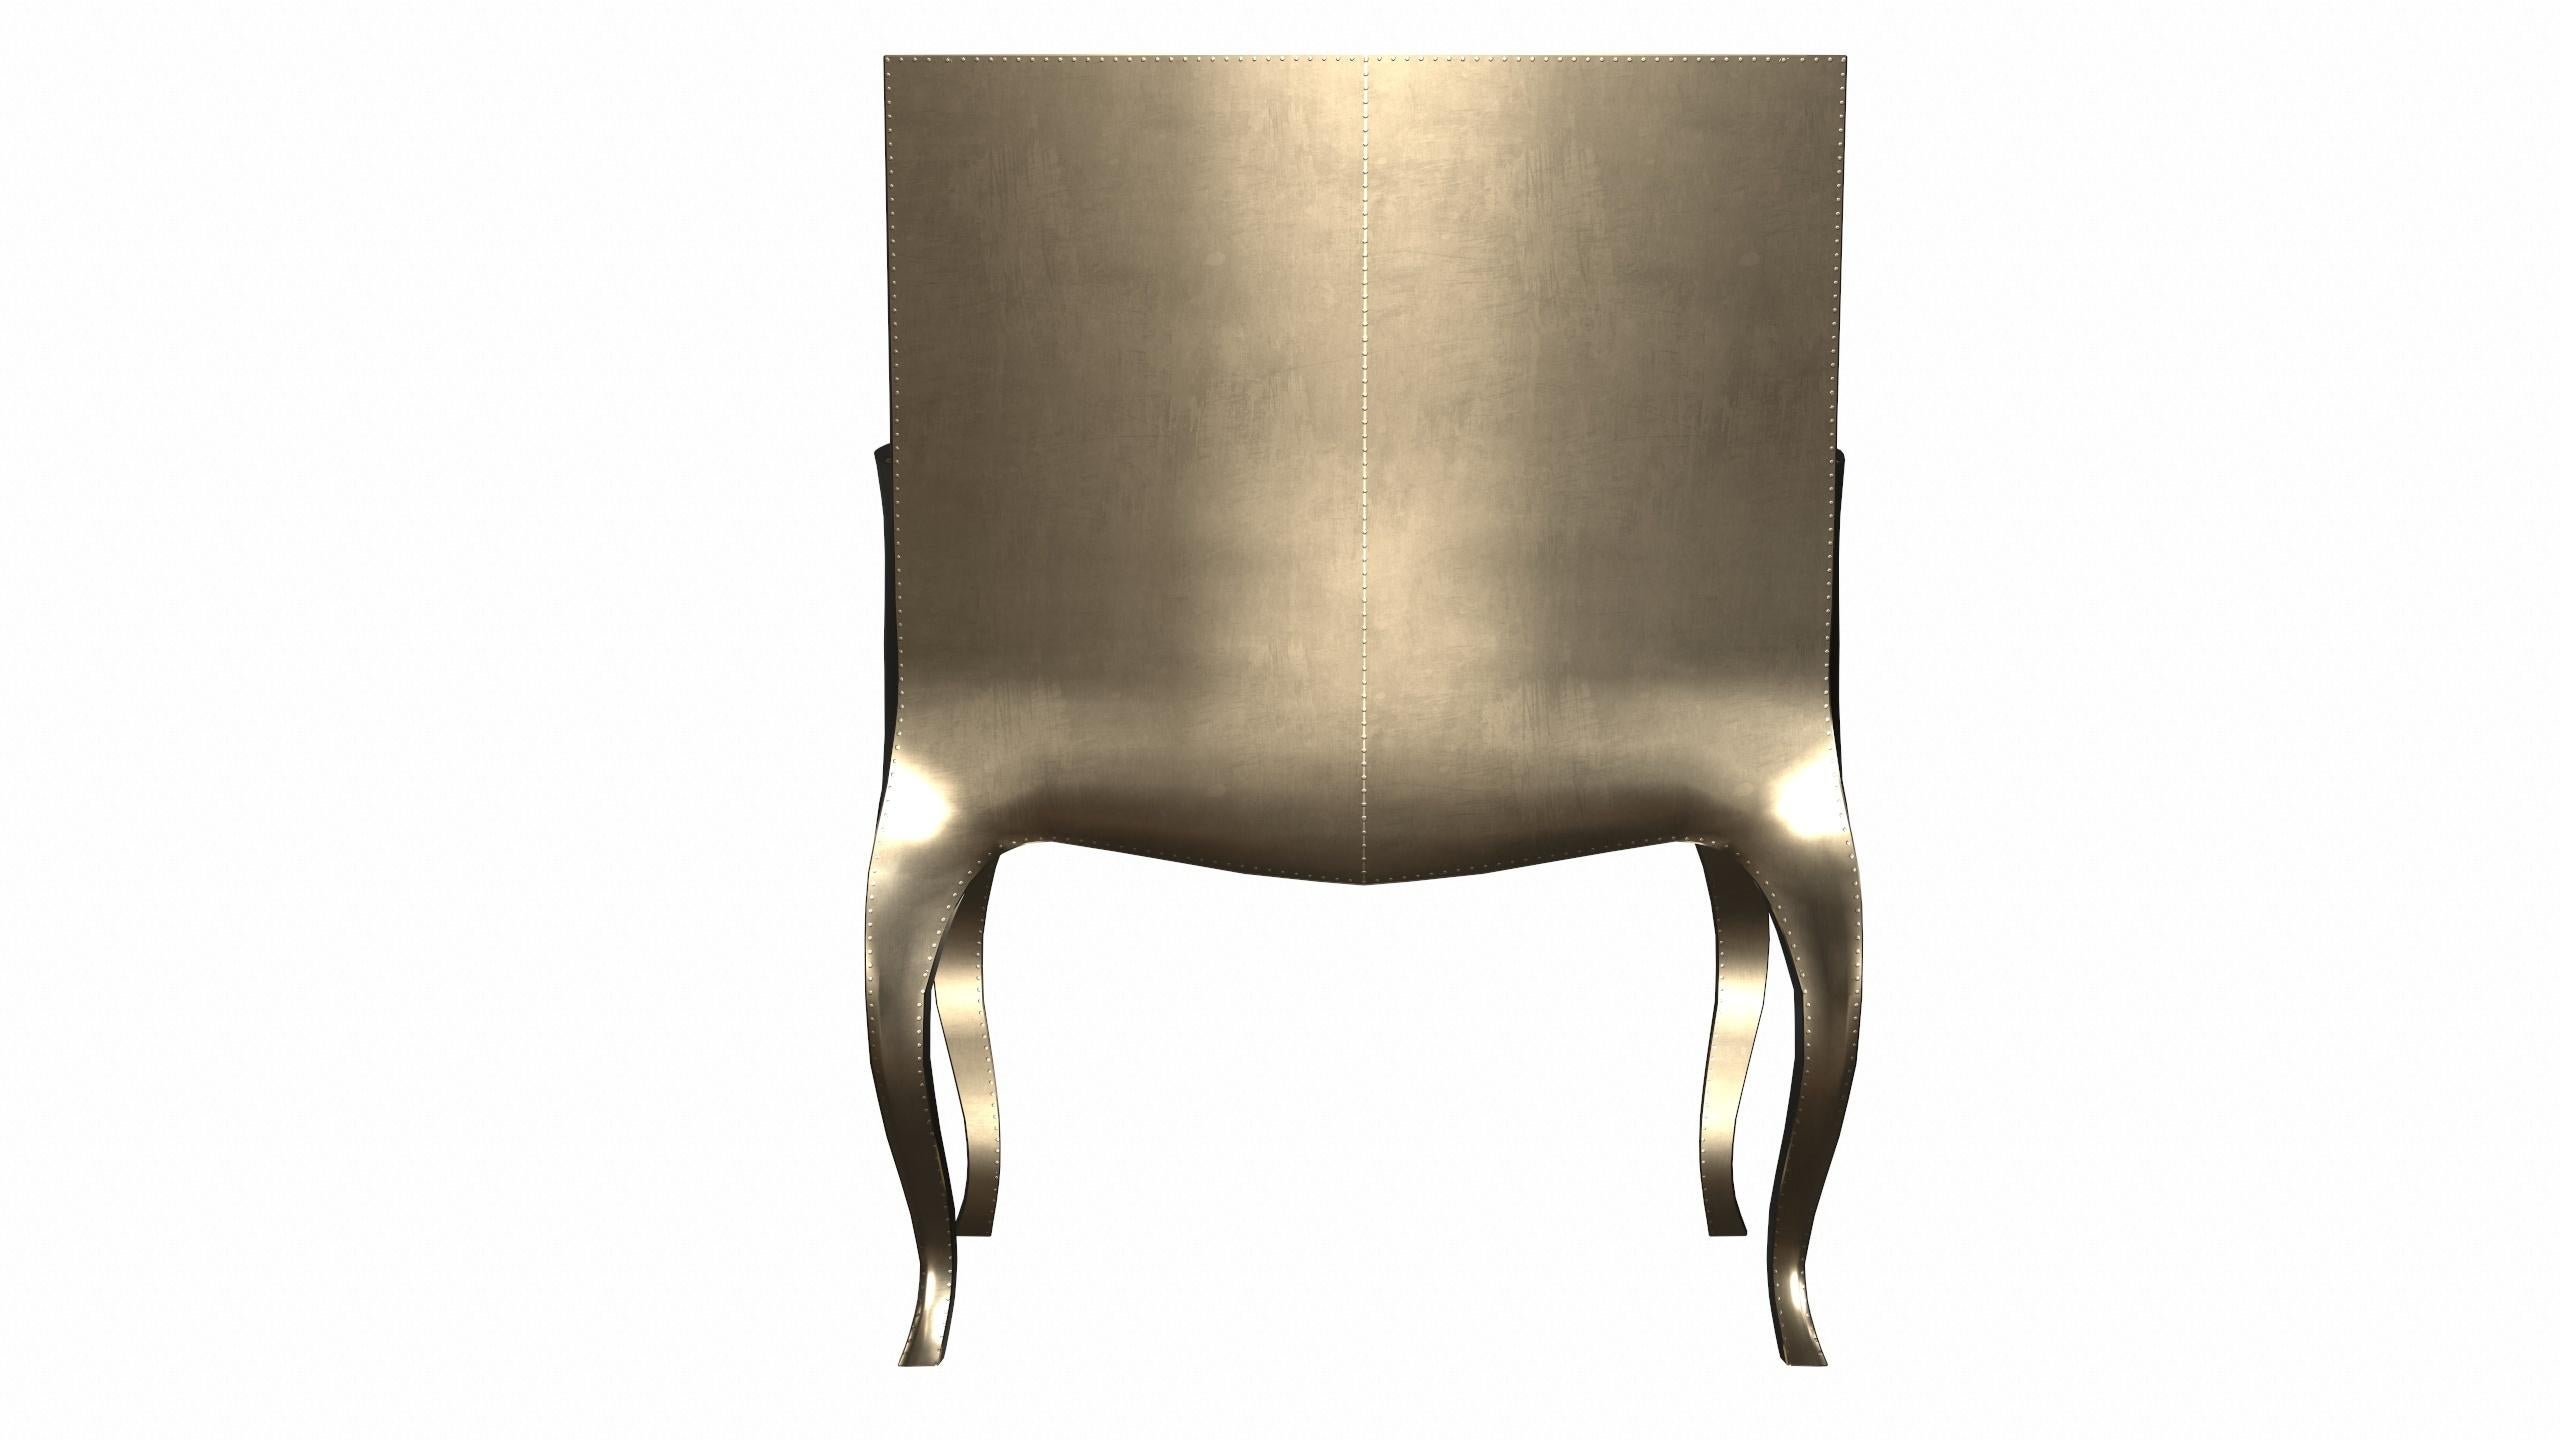 Art Deco Desk Chair in Smooth Brass by Paul Mathieu for S. Odegard For Sale 1